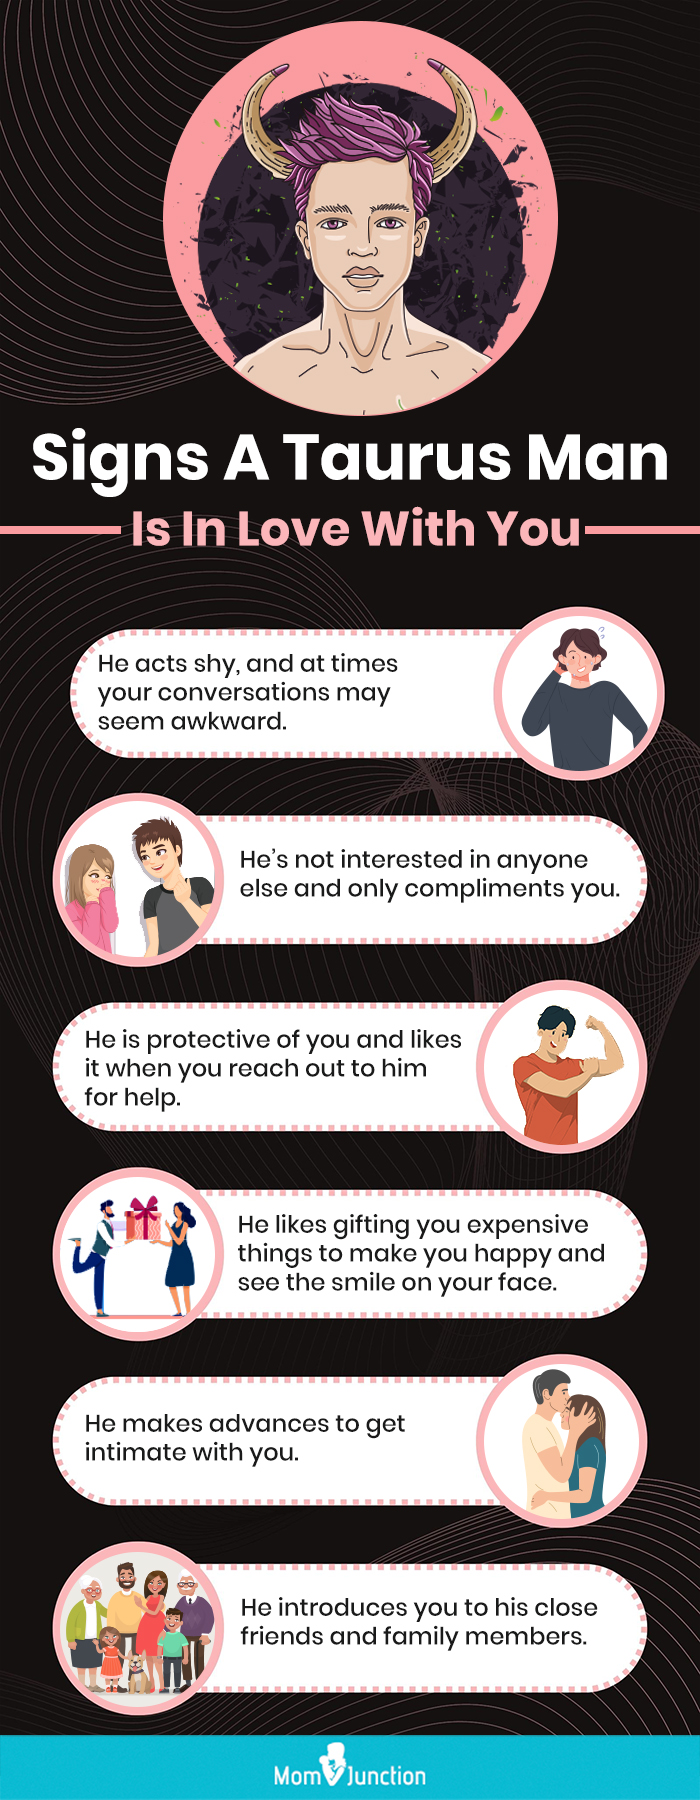 signs of a taurus man in love (infographic)